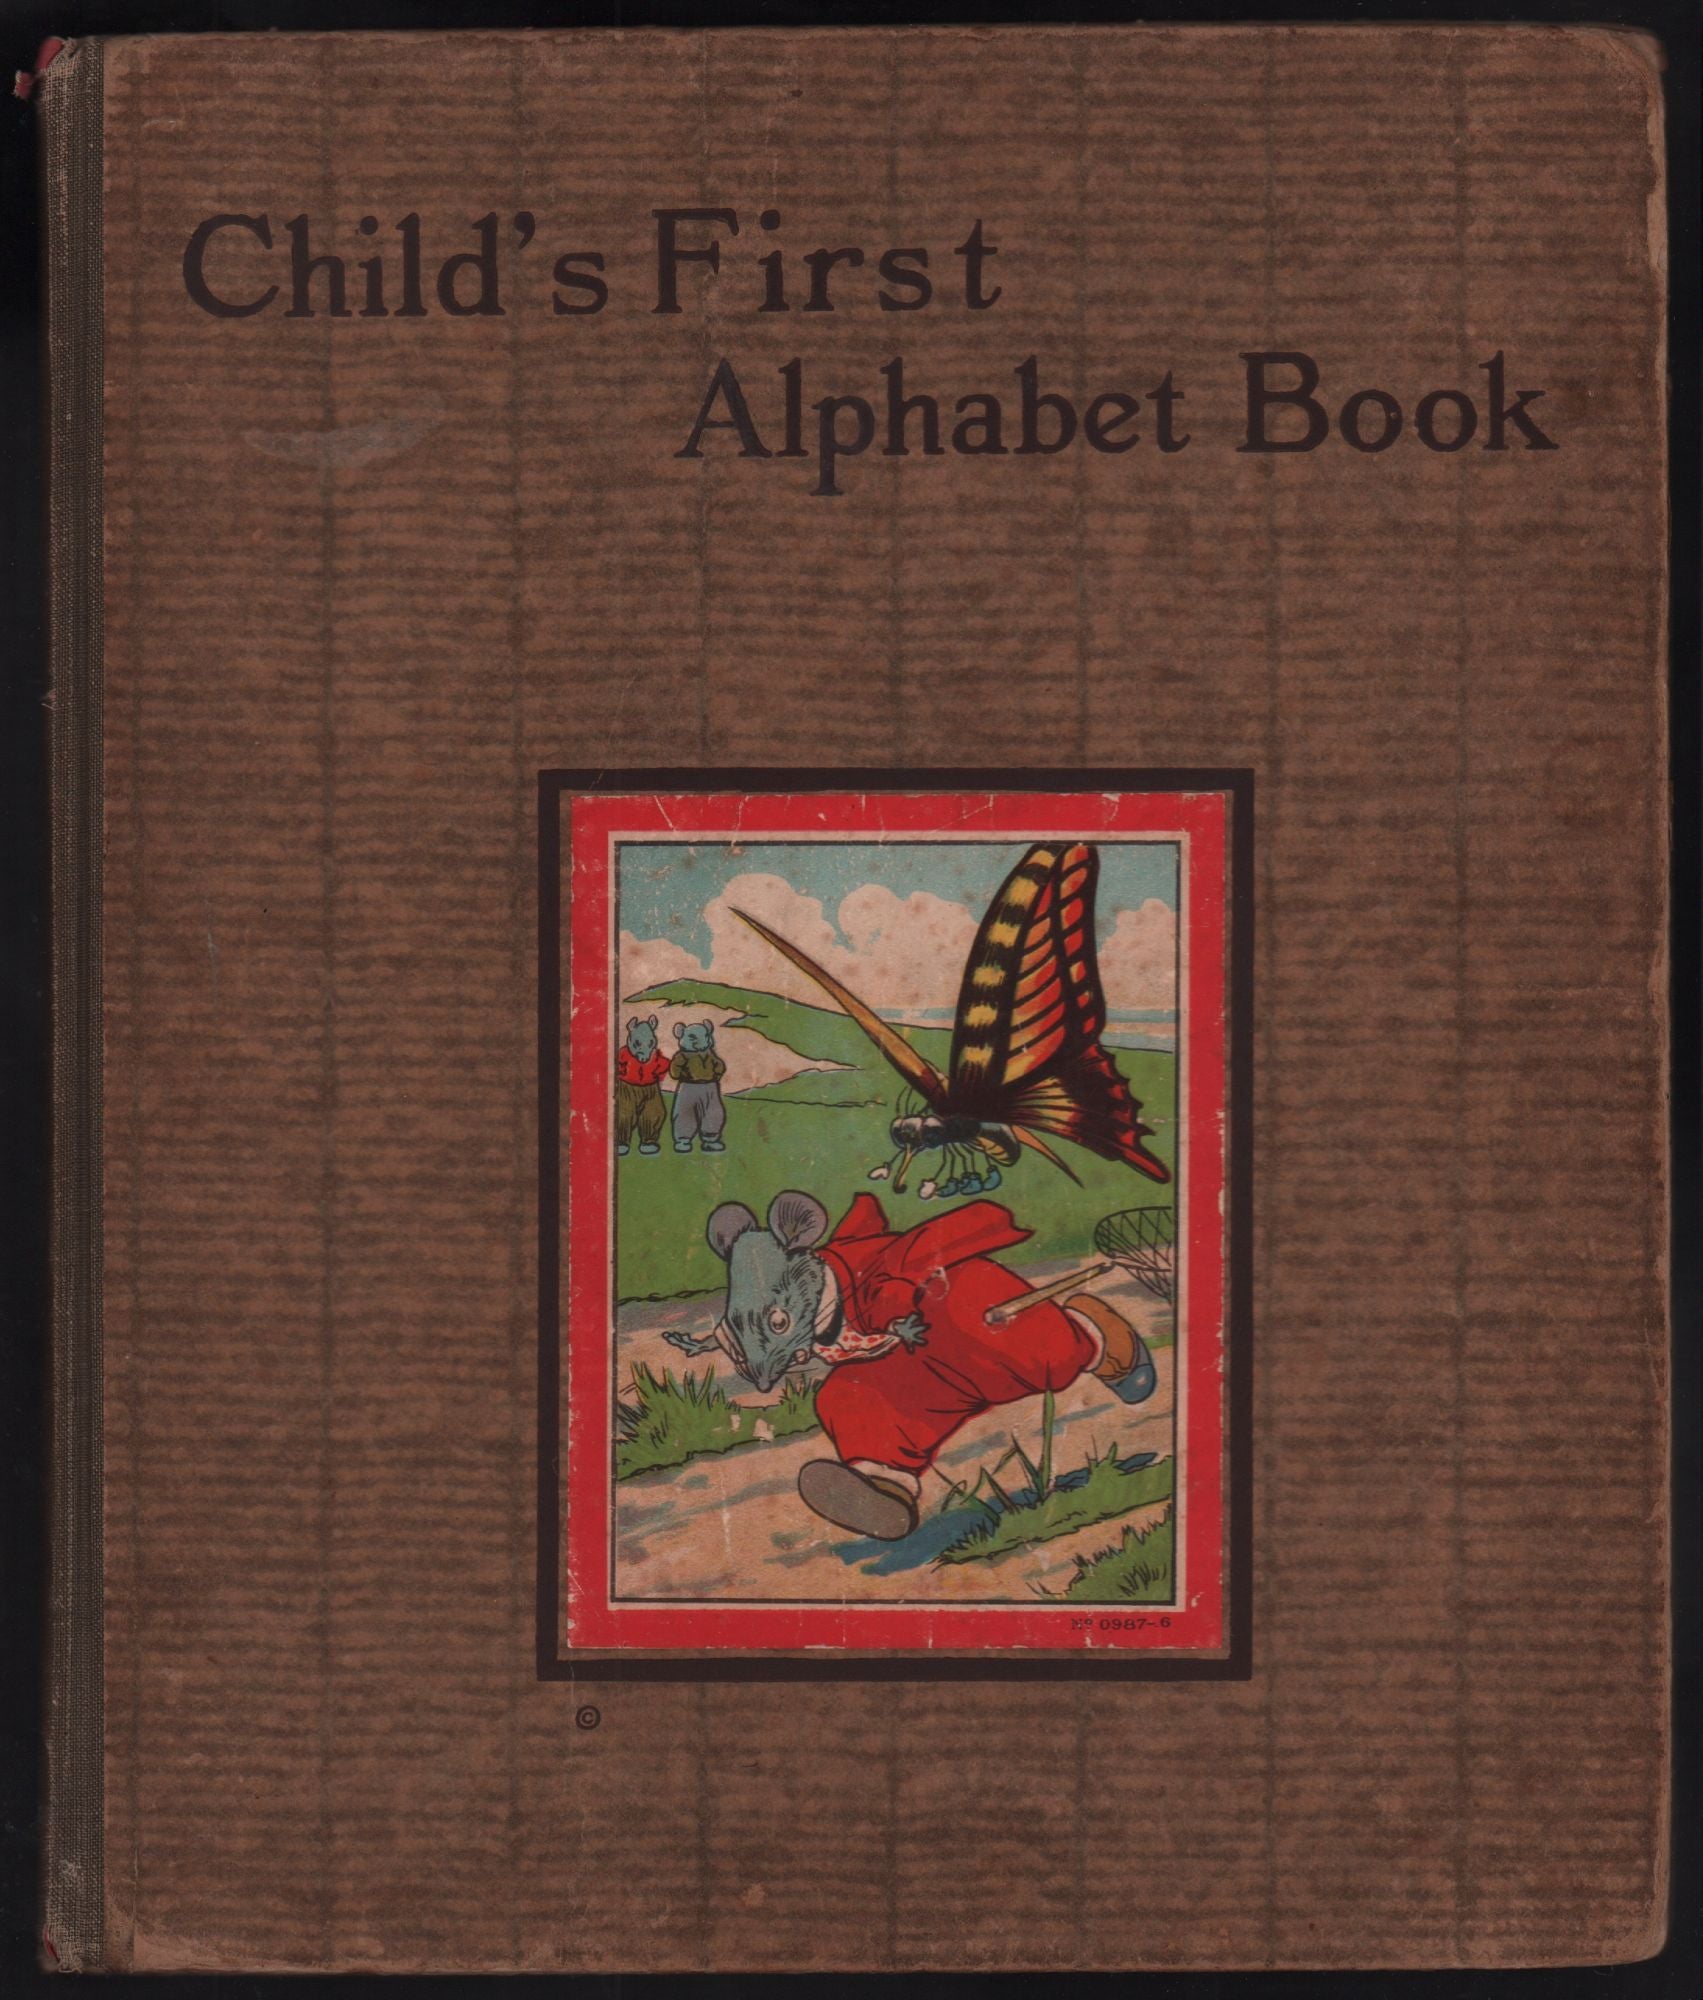 Child's First Alphabet Book by anon on Old Children's Books